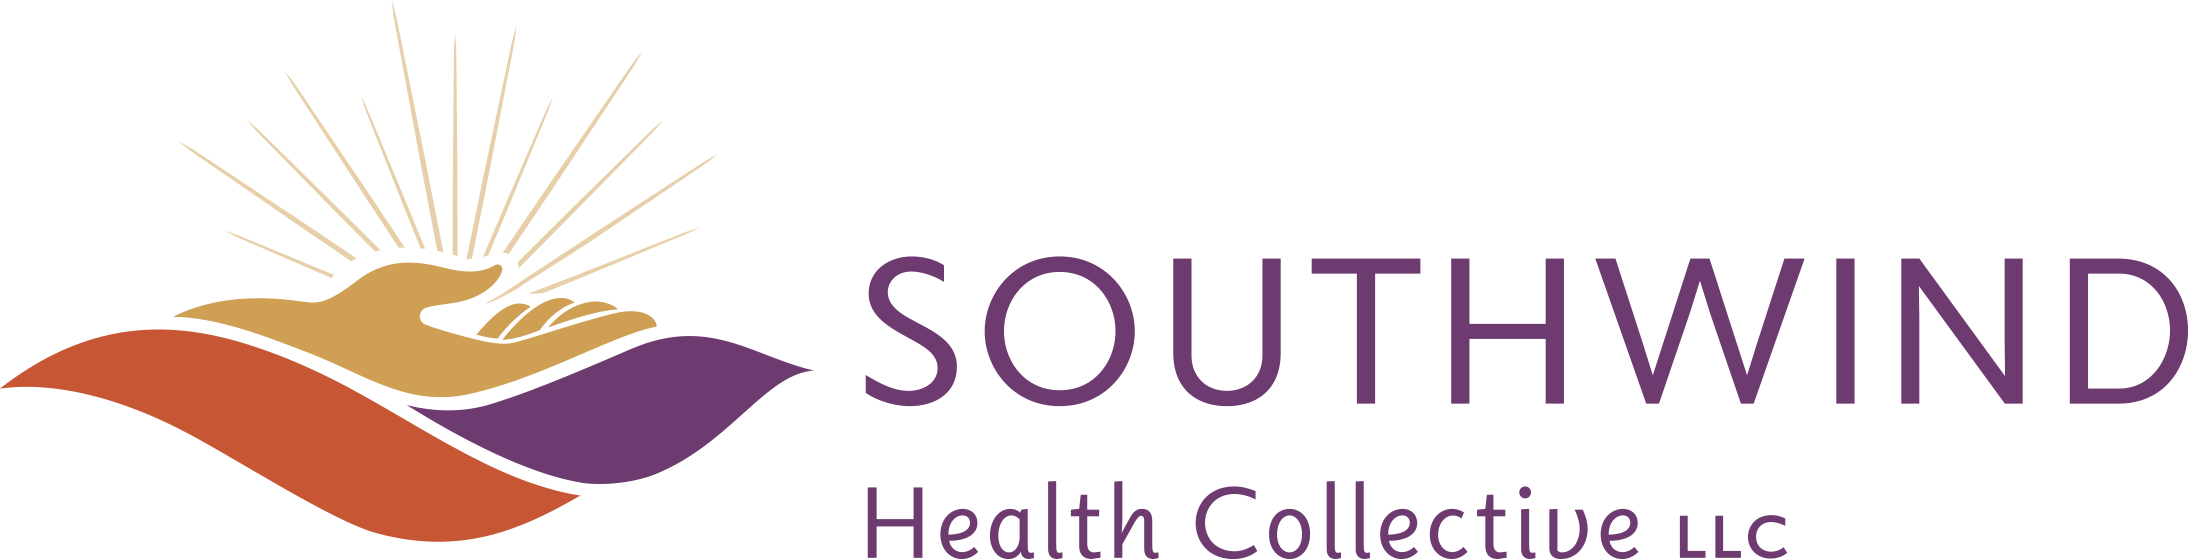 Southwind Health Collective